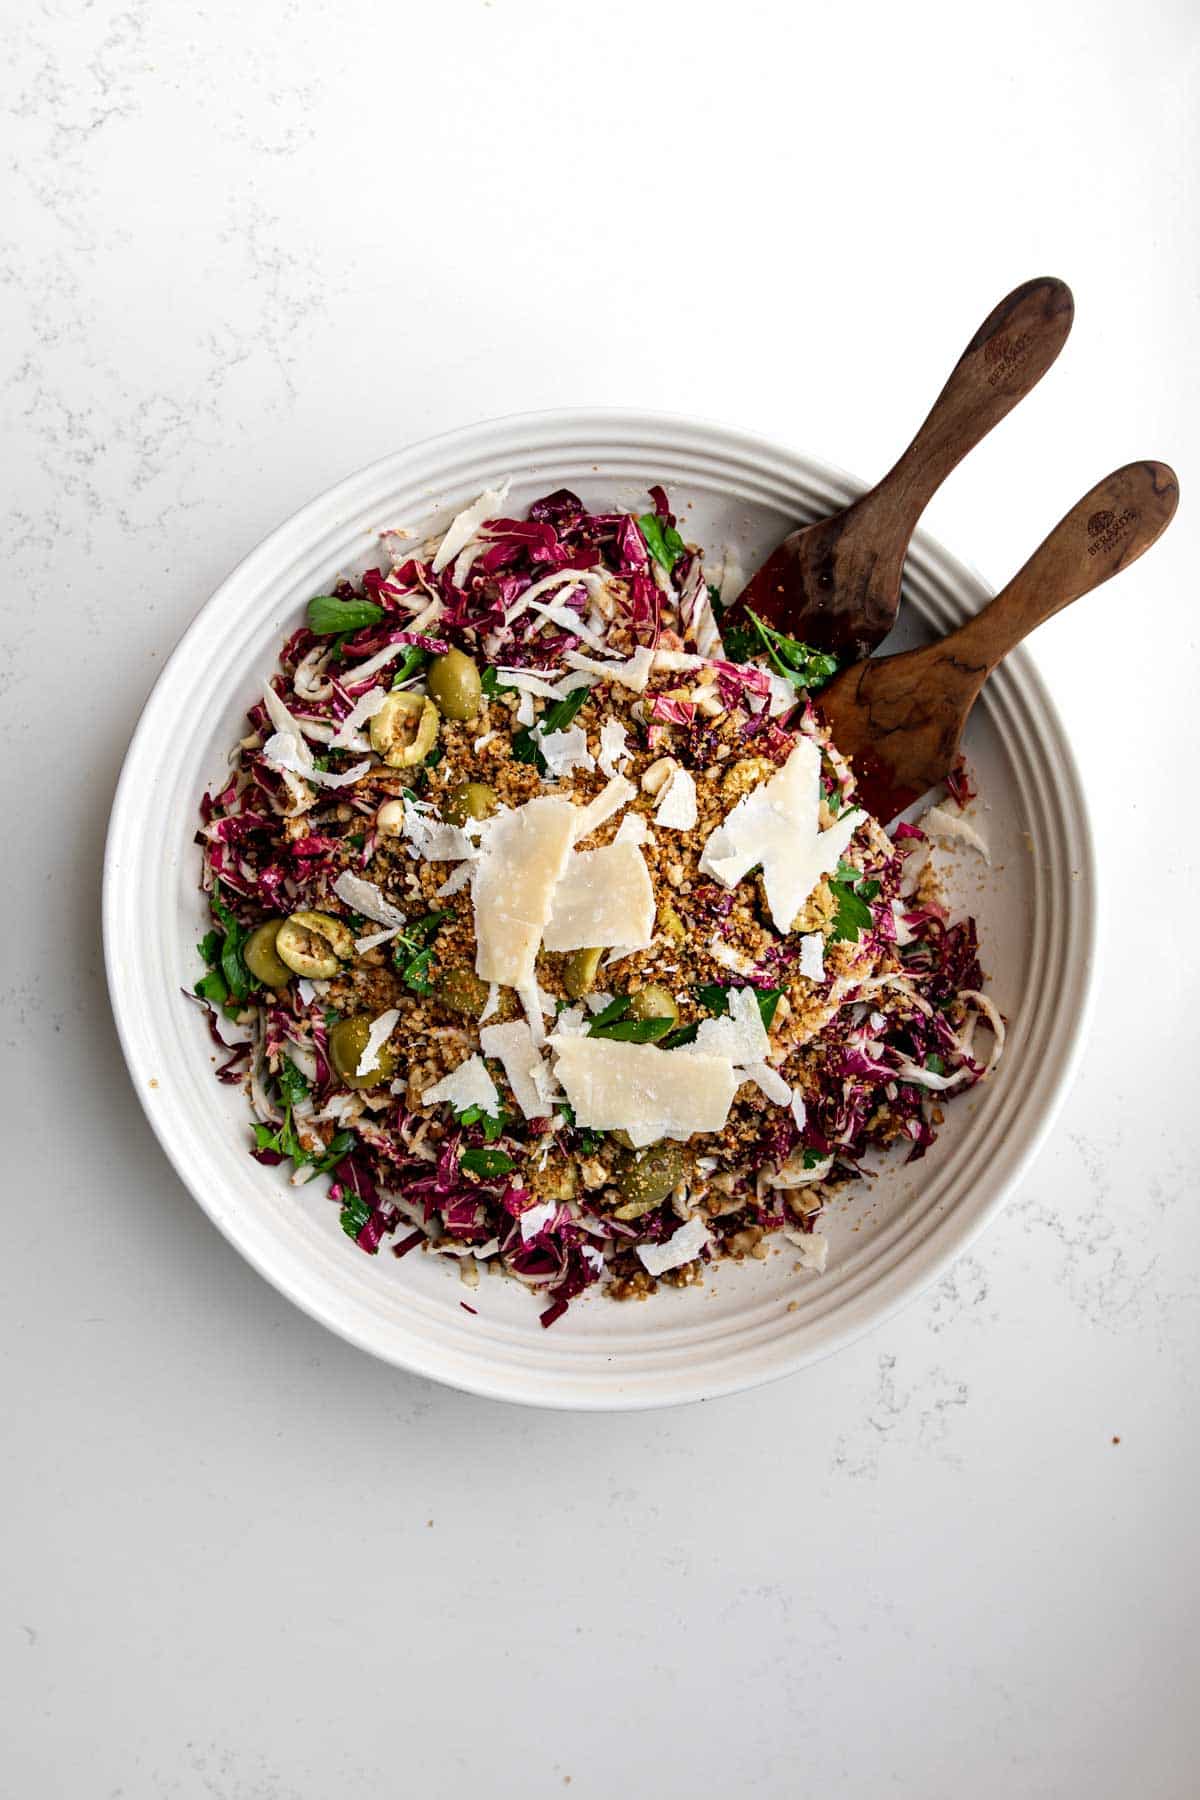 Large white bowl filled with radicchio salad topped with parmesan, olives and breadcrumbs with two wooden spoons coming out of the side.